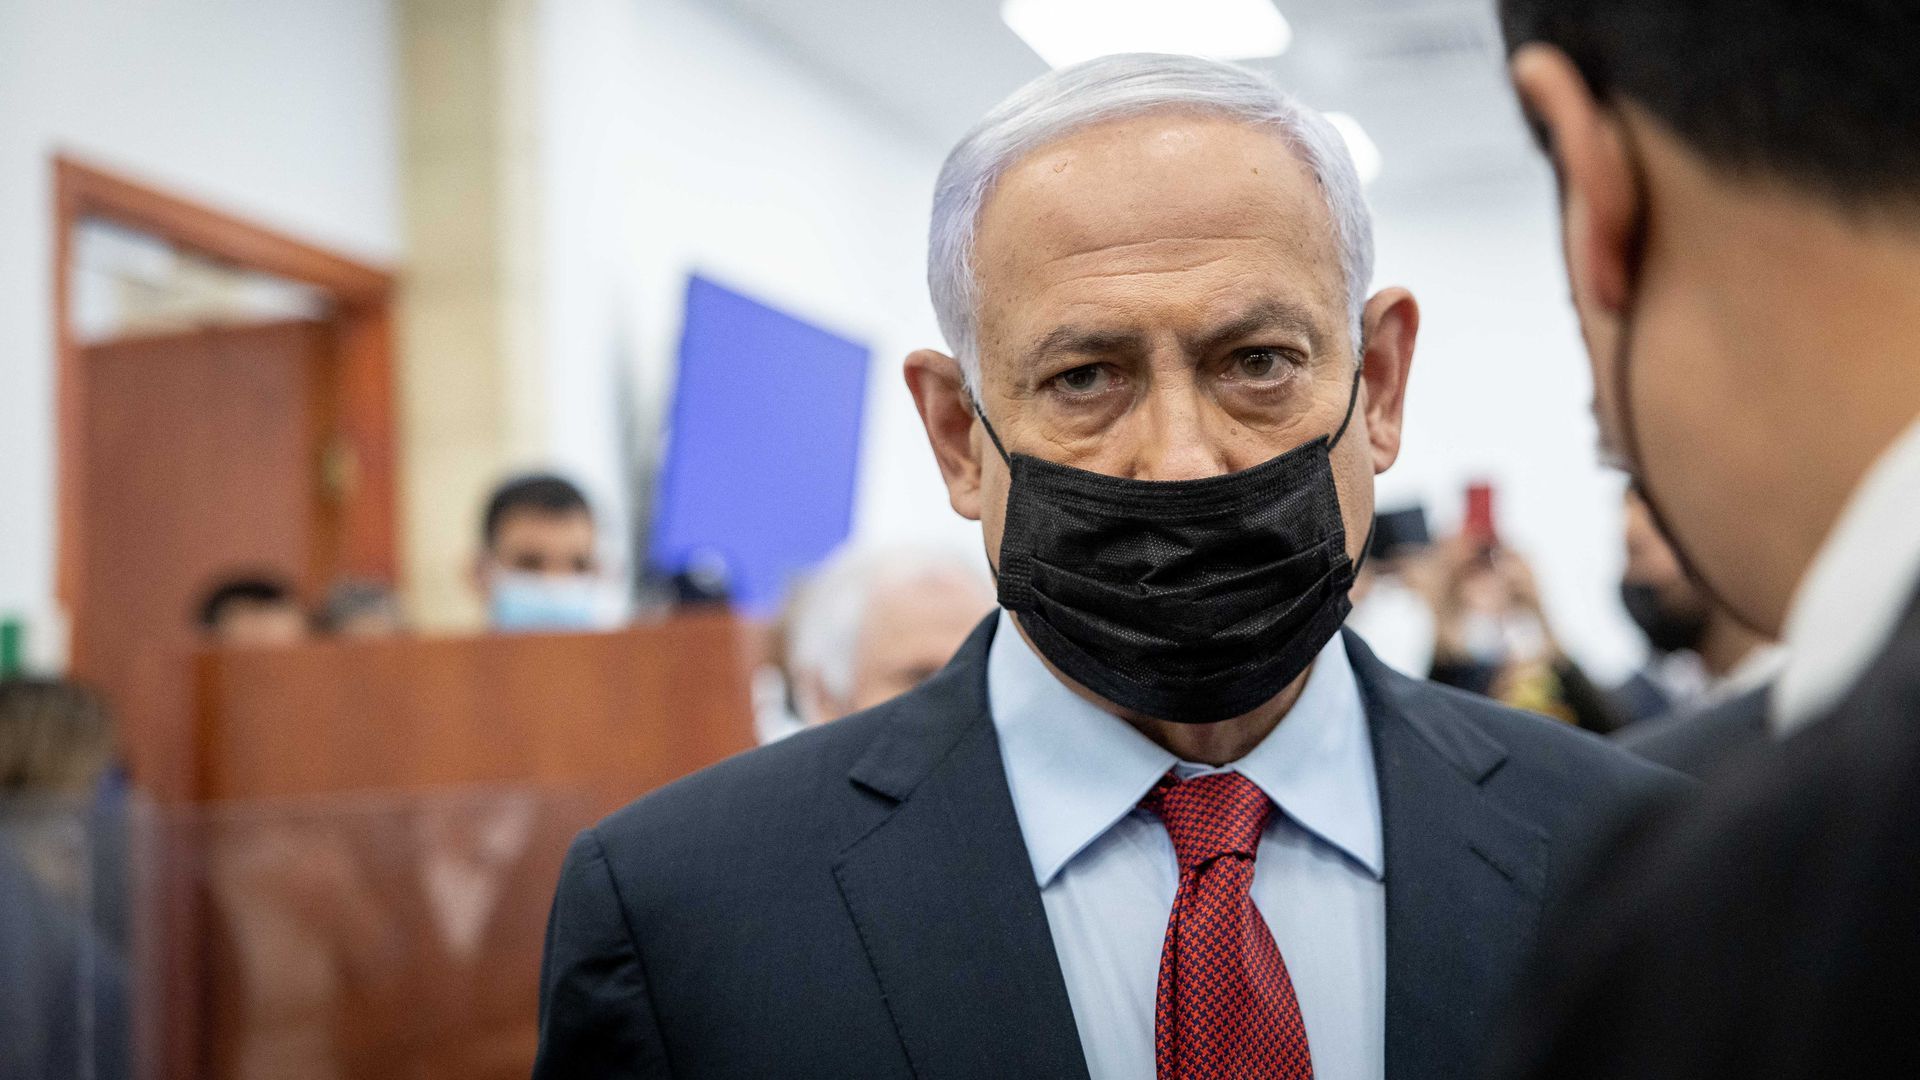 Former Israeli Prime Minister Benjamin Netanyahu stands at the courtroom on March 23. Photo: Yonatan Sindel/AFP via Getty Images